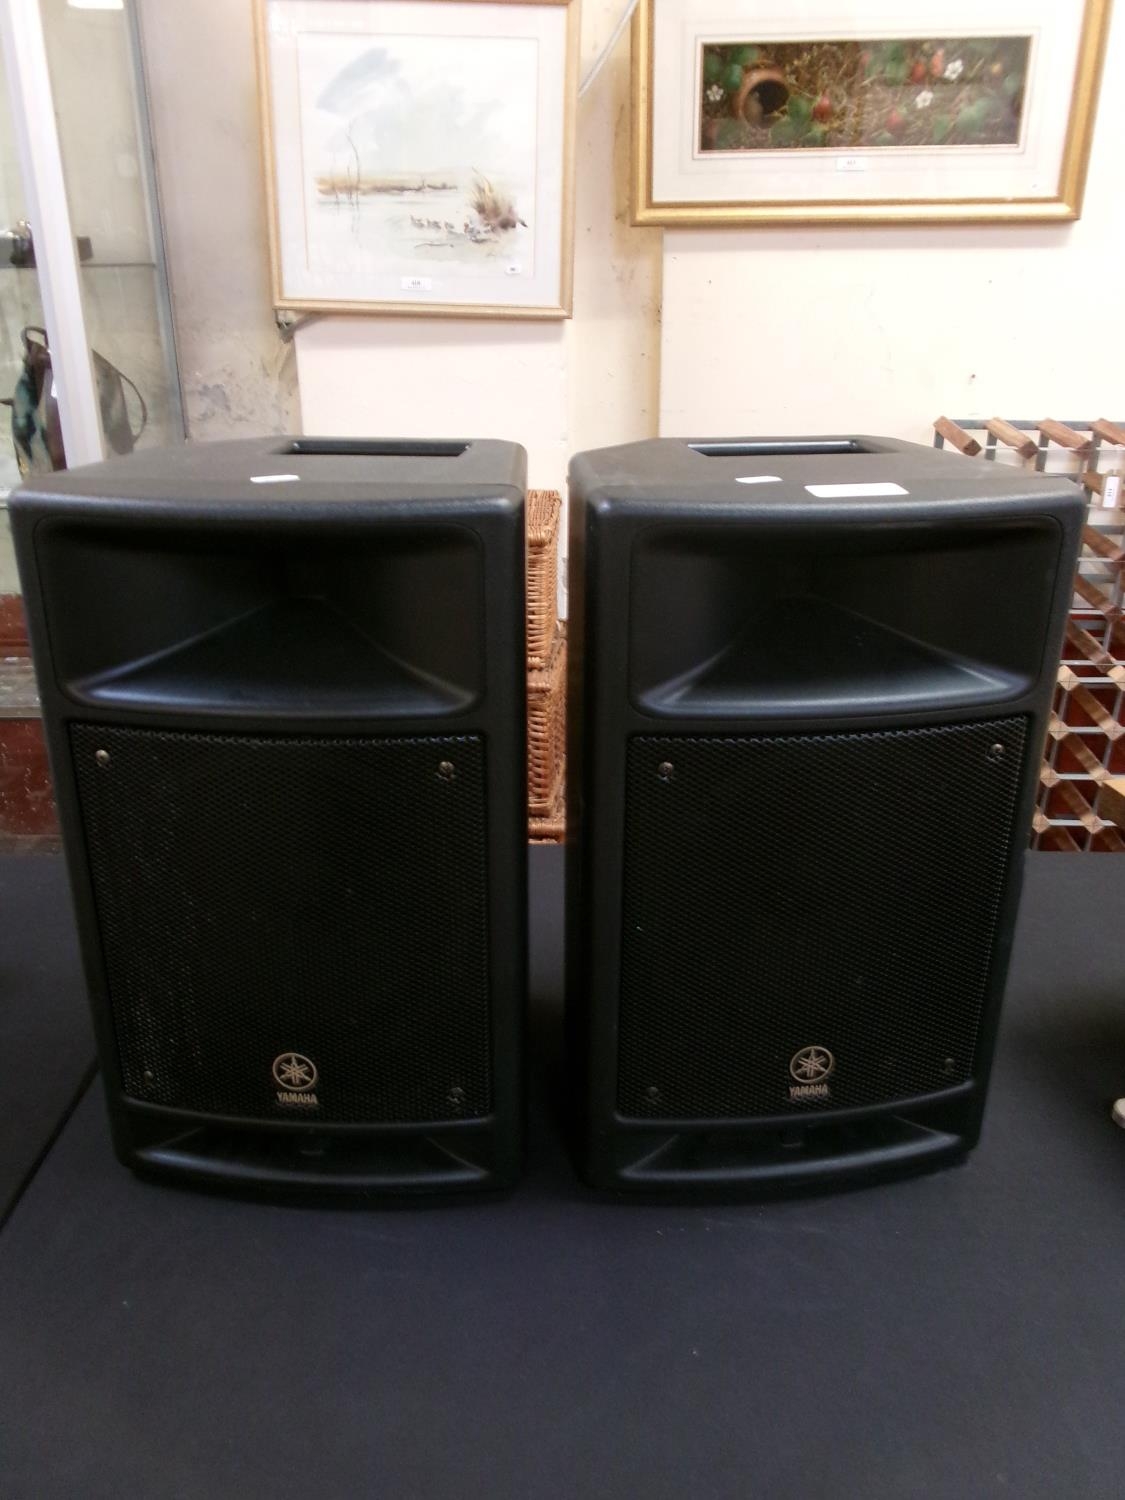 A pair of Yamaha Stagepas  portable PA system audio speakers